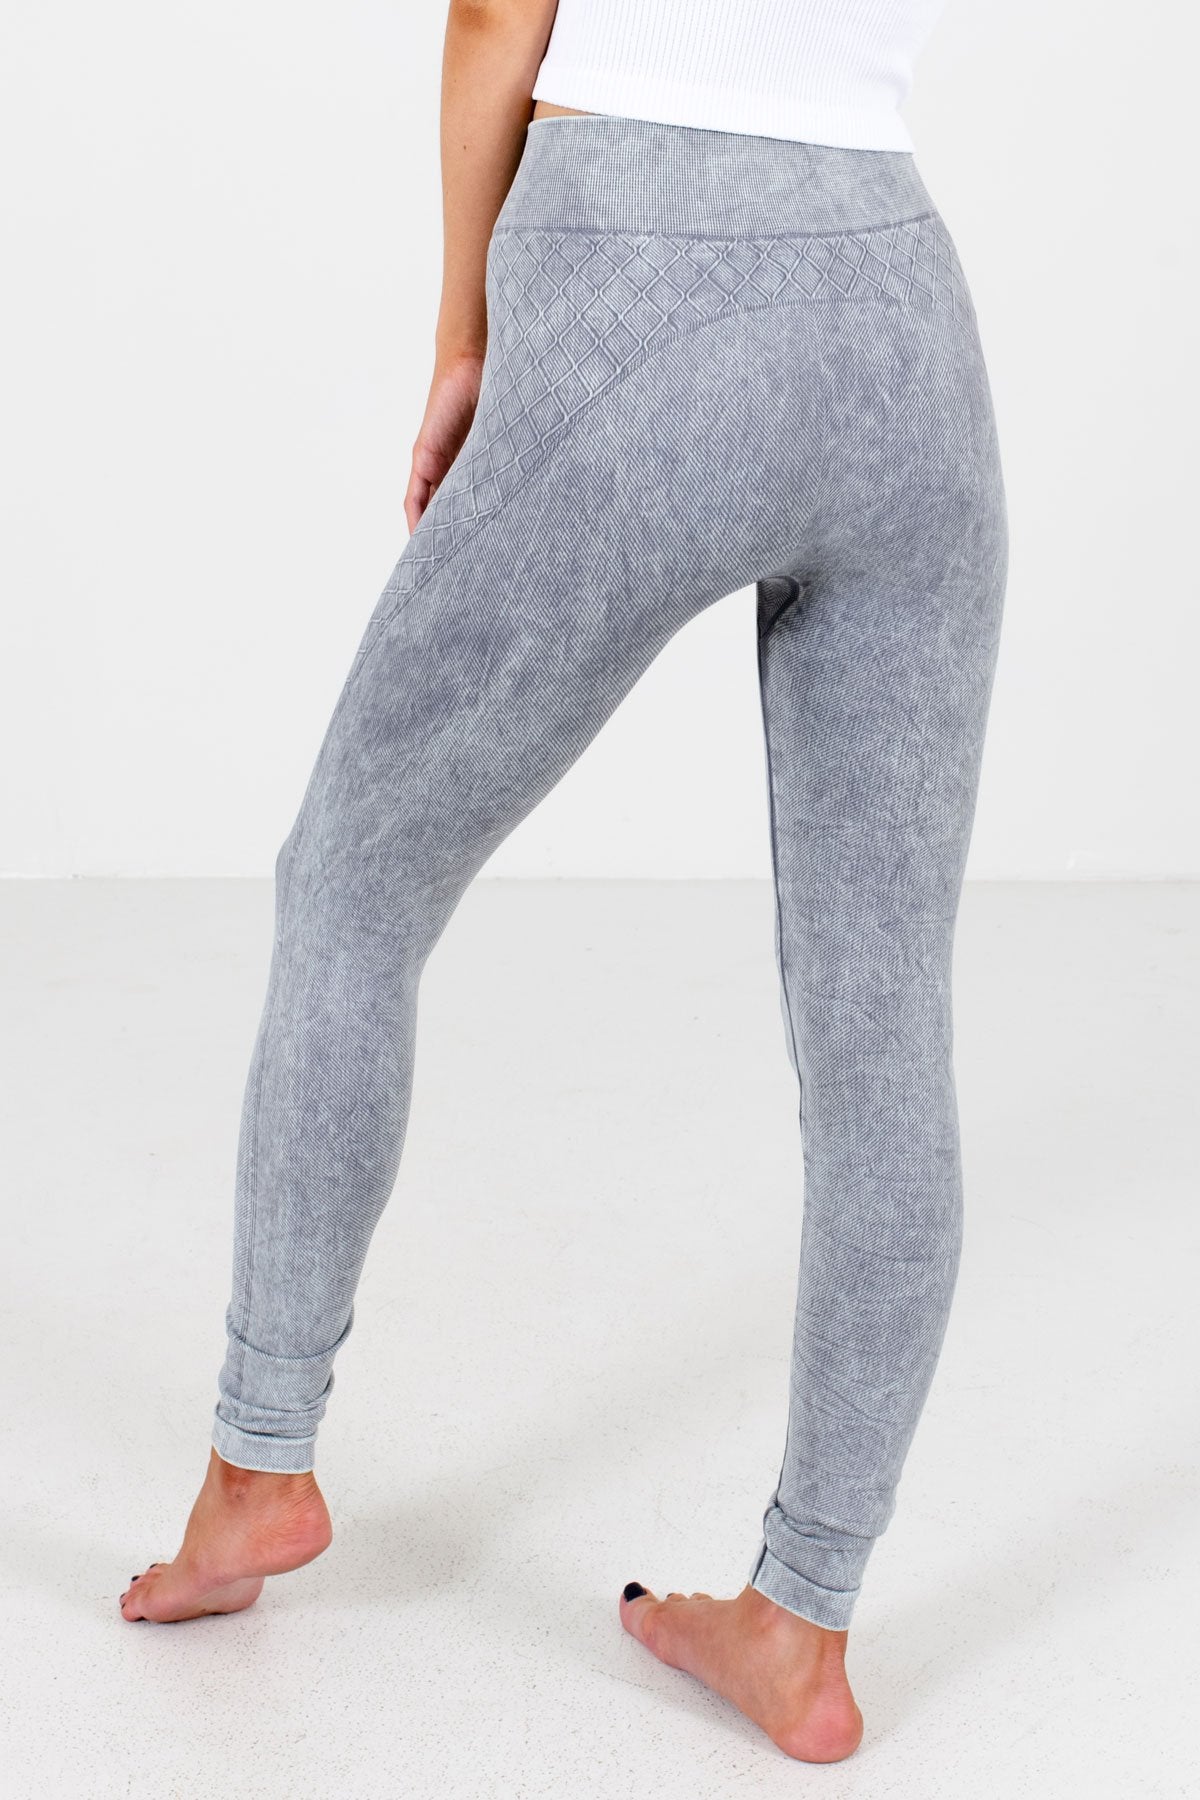 Women's Charcoal Gray High Waisted Style Boutique Active Leggings